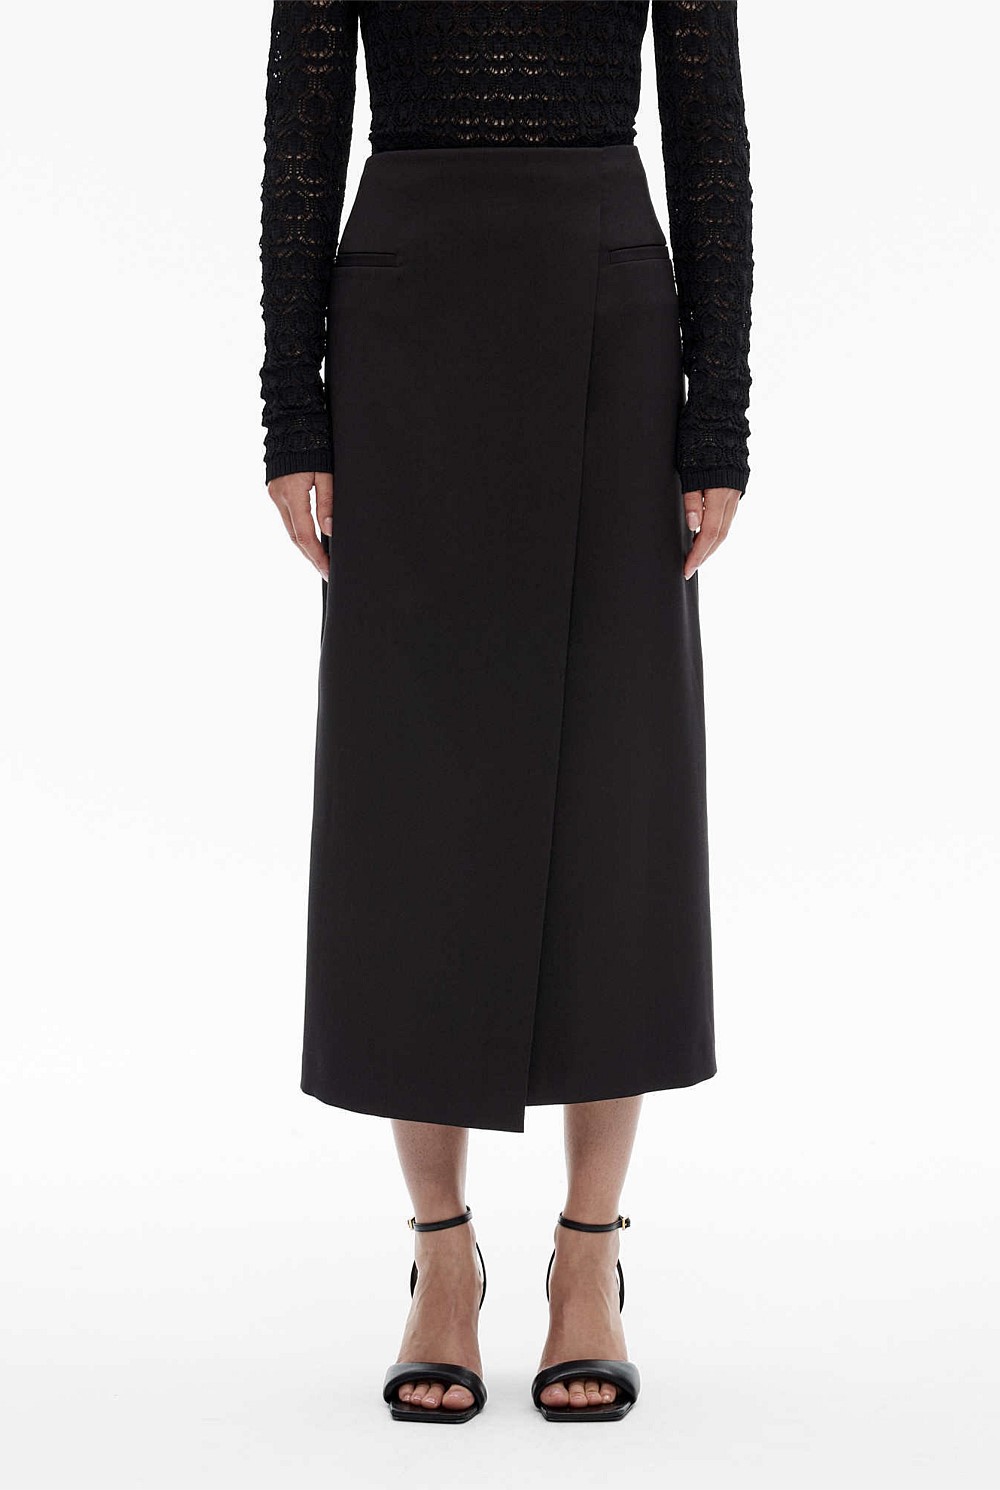 Shop New Season Witchery Online & In-store- Witchery